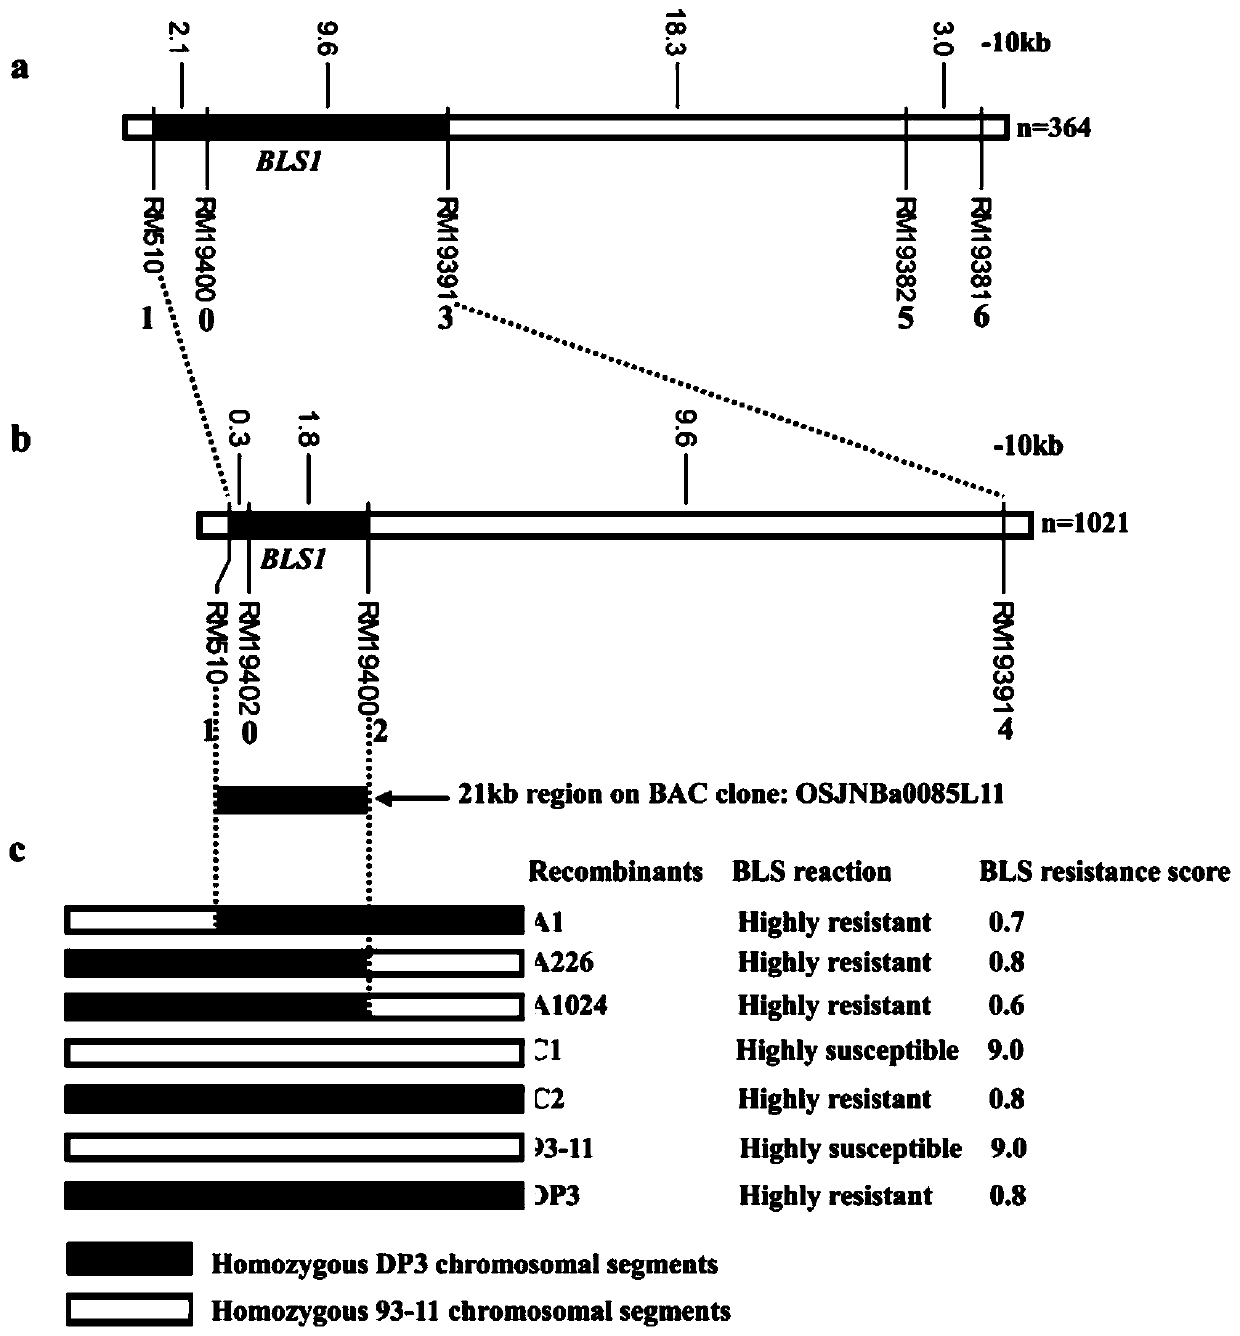 Molecular Marker and Application of Rice Bacterial Spot Resistance Main Gene bls1 Locus